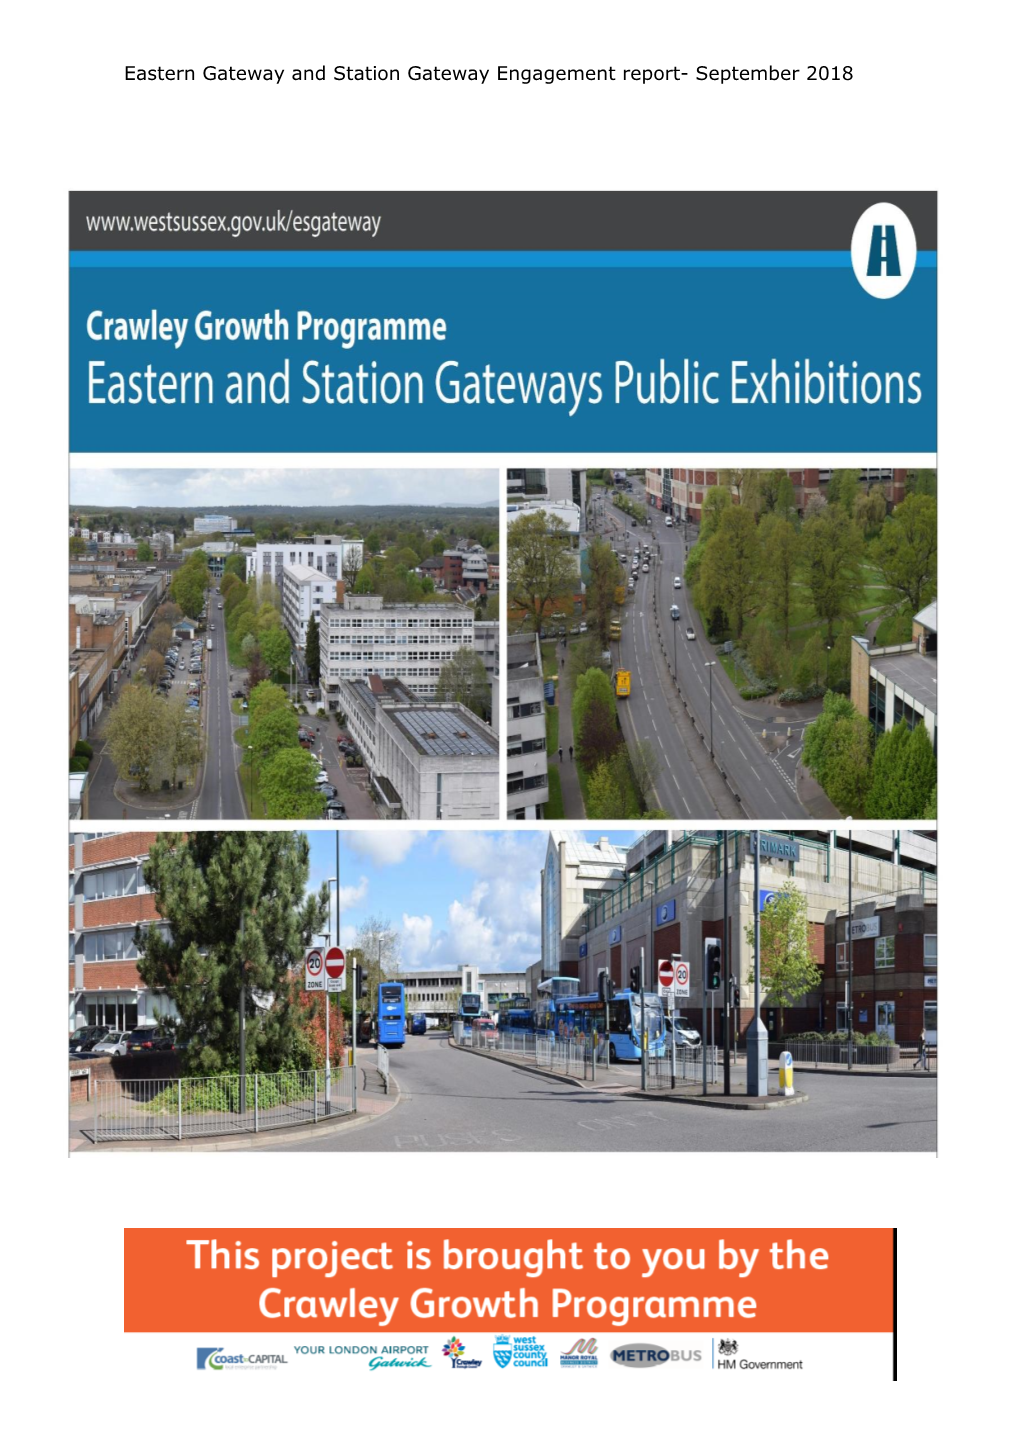 Eastern Gateway and Station Gateway Engagement Report- September 2018